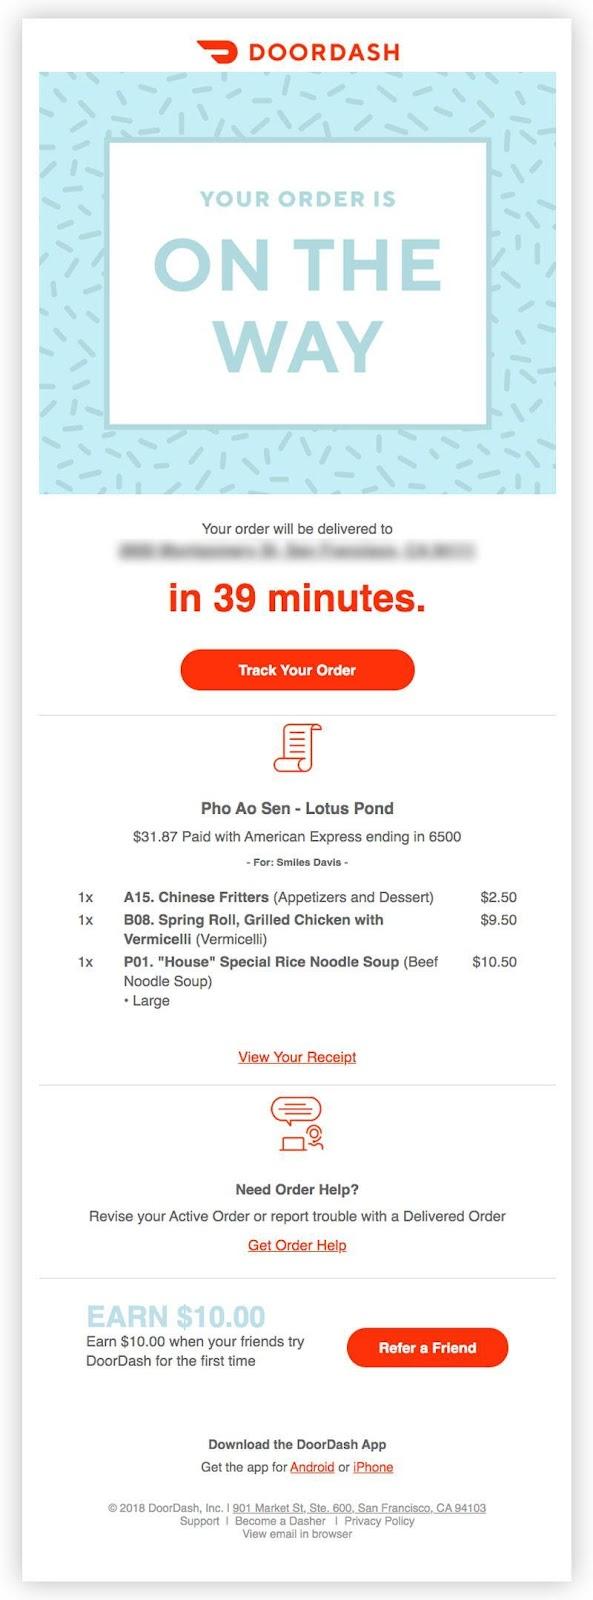 10 Best Order Confirmation Emails You Can Use Today